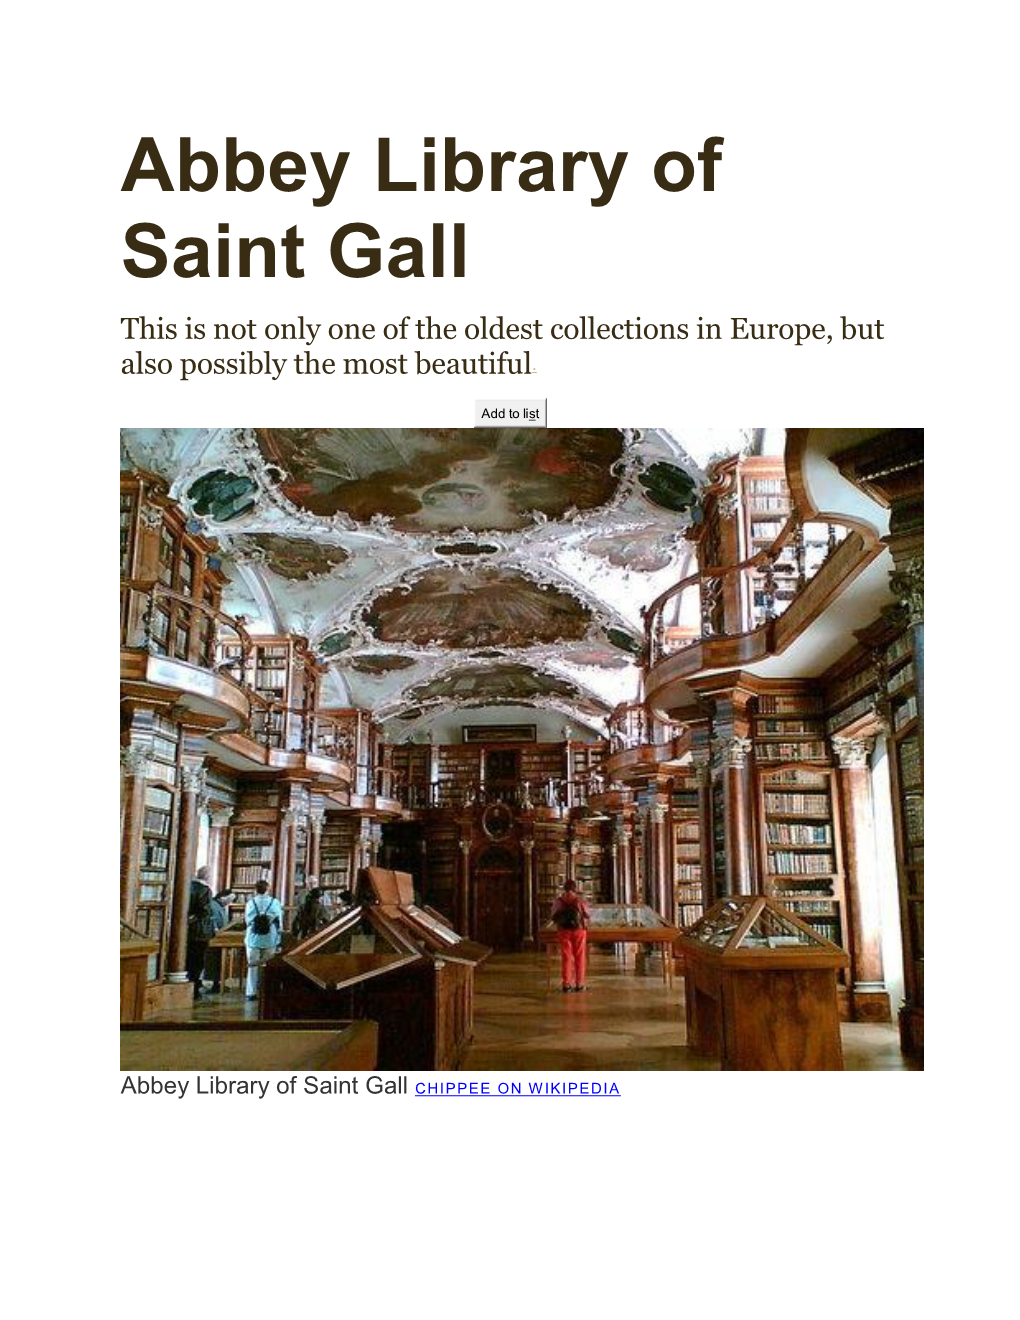 Abbey Library of Saint Gall This Is Not Only One of the Oldest Collections in Europe, but Also Possibly the Most Beautiful